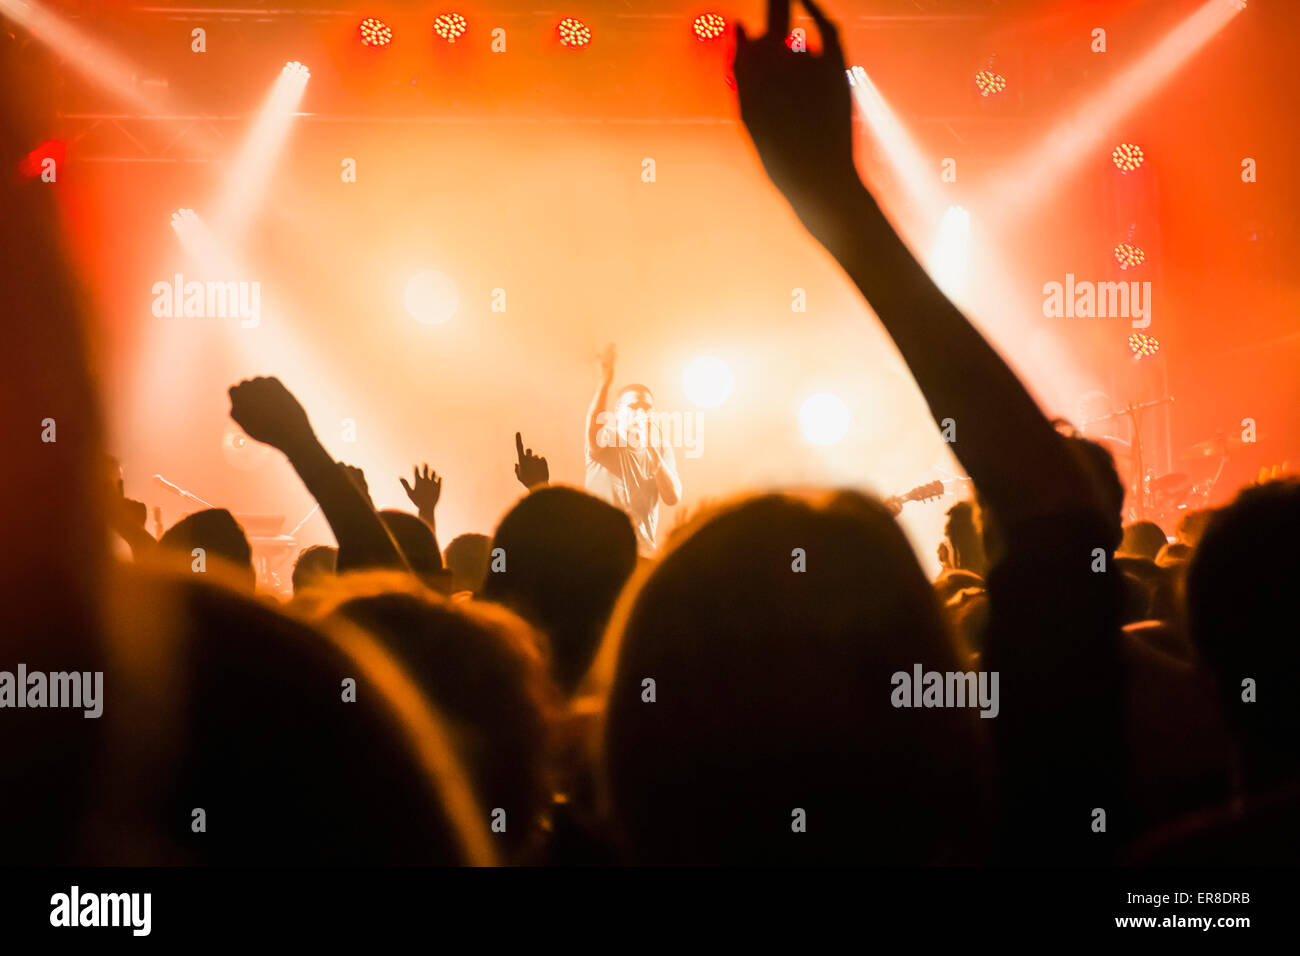 Male singer performing in front of audience Stock Photo